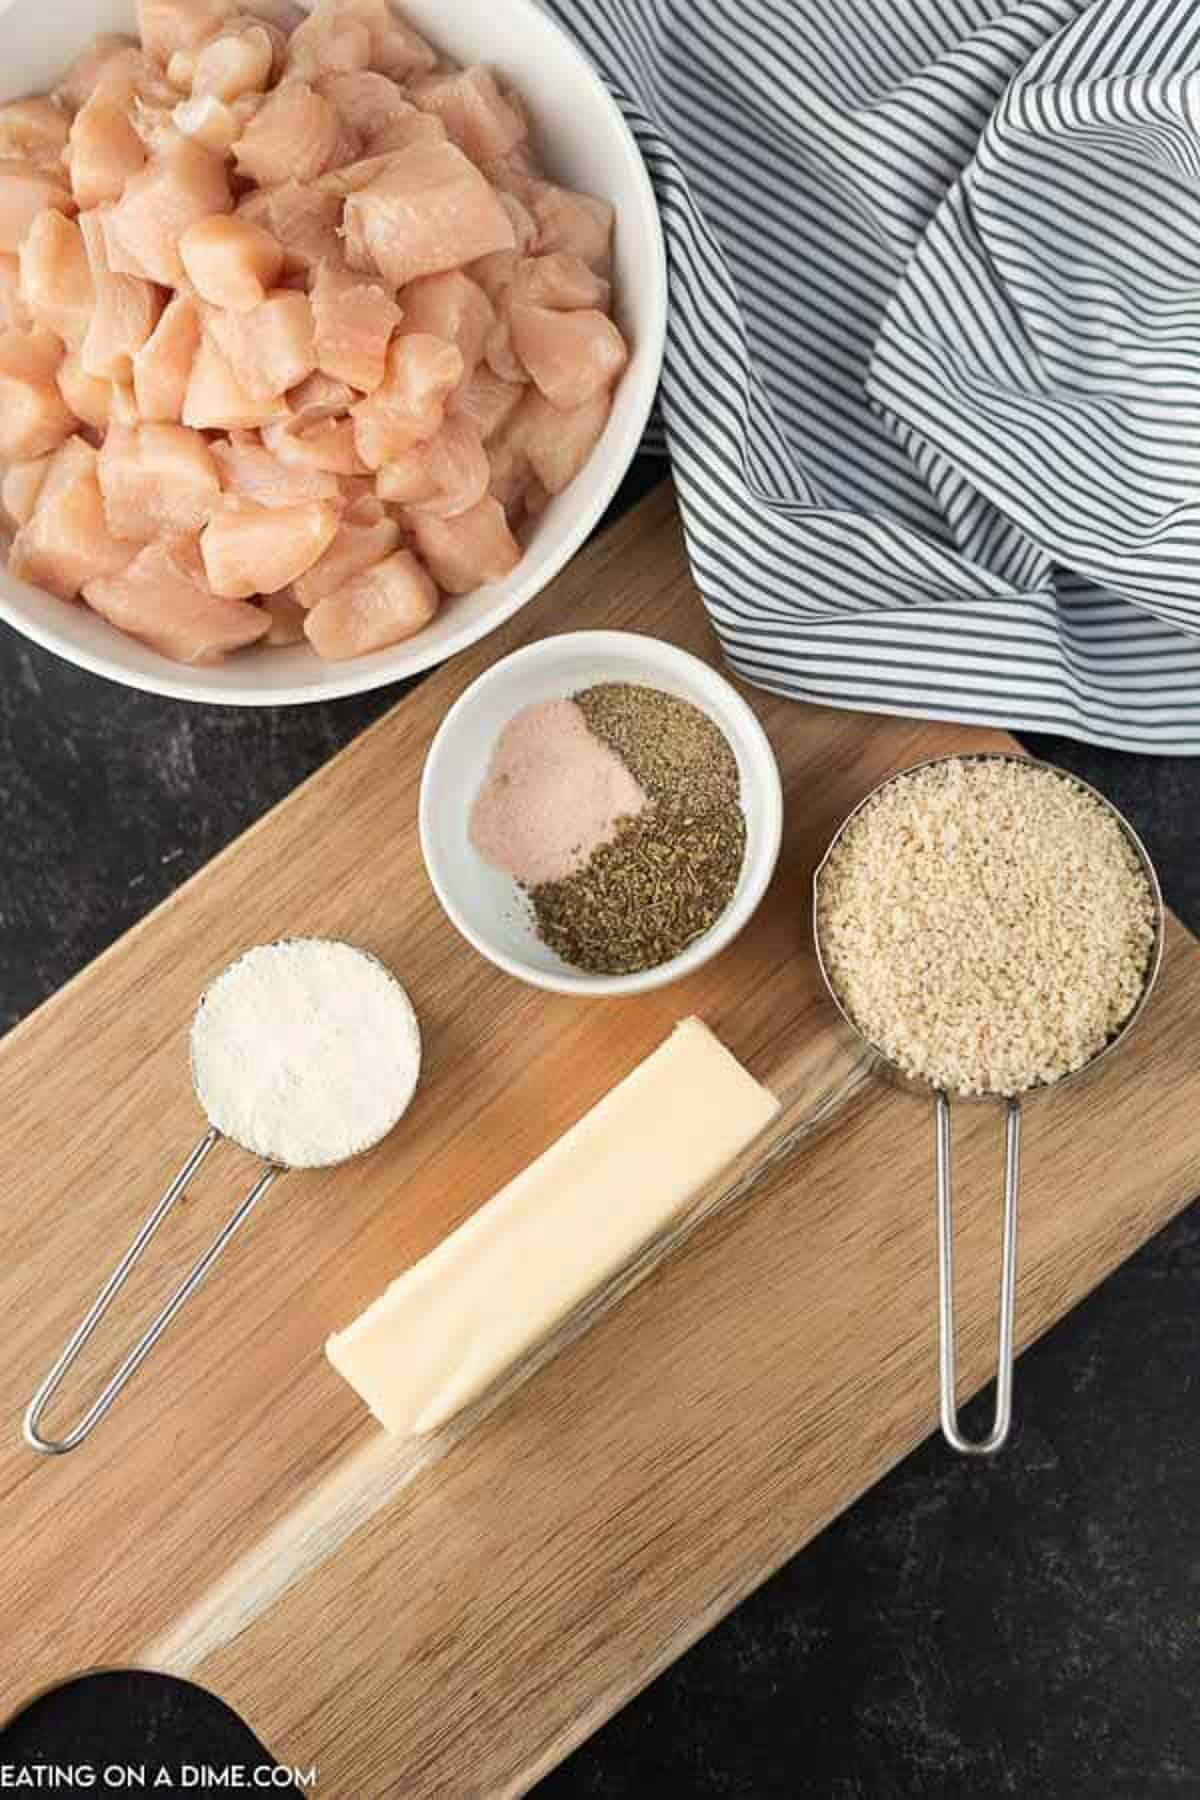 Ingredients needed to make air fryer chicken nuggets: chicken breasts, Italian Seasoning, salt and pepper, bread crumbs, parmesan cheese and butter. 